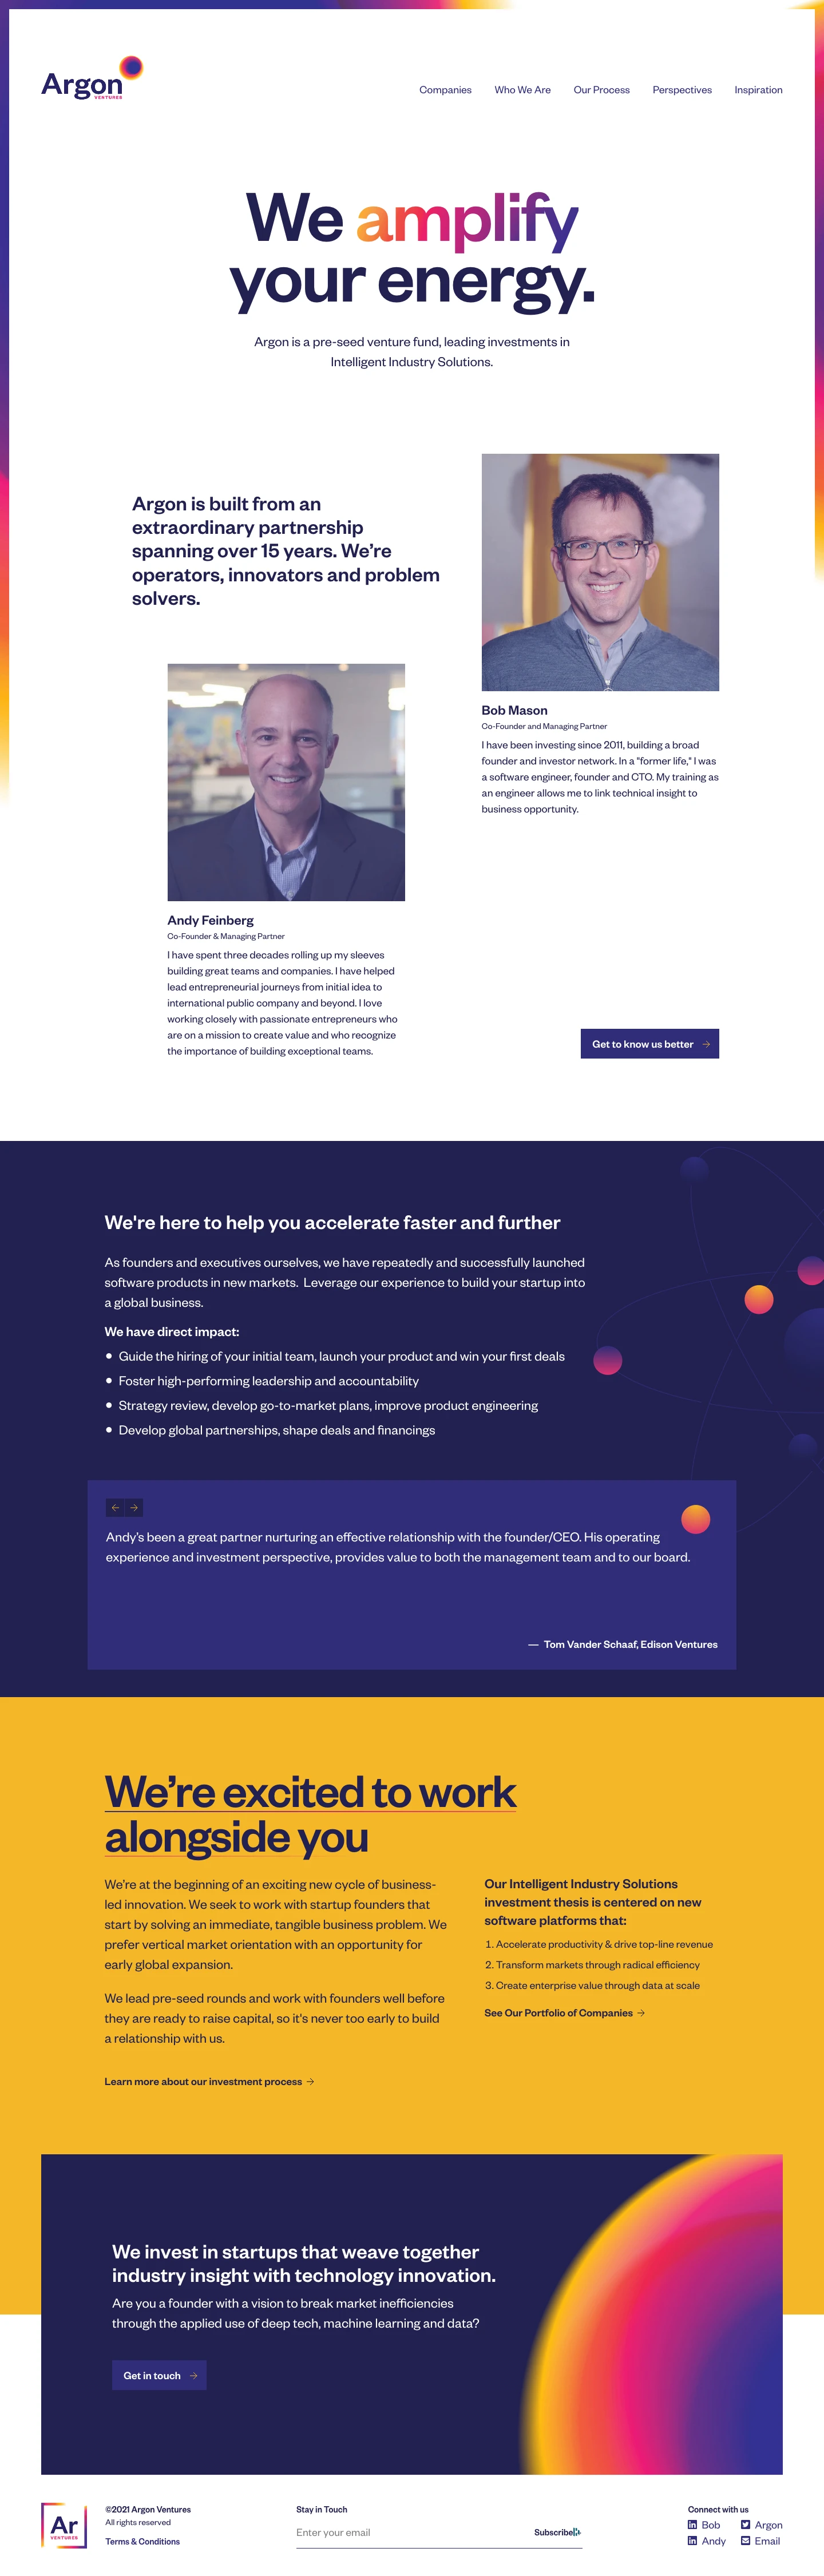 Argon Ventures Landing Page Example: We amplify your energy. Argon is a pre-seed venture fund, leading investments in Intelligent Industry Solutions.